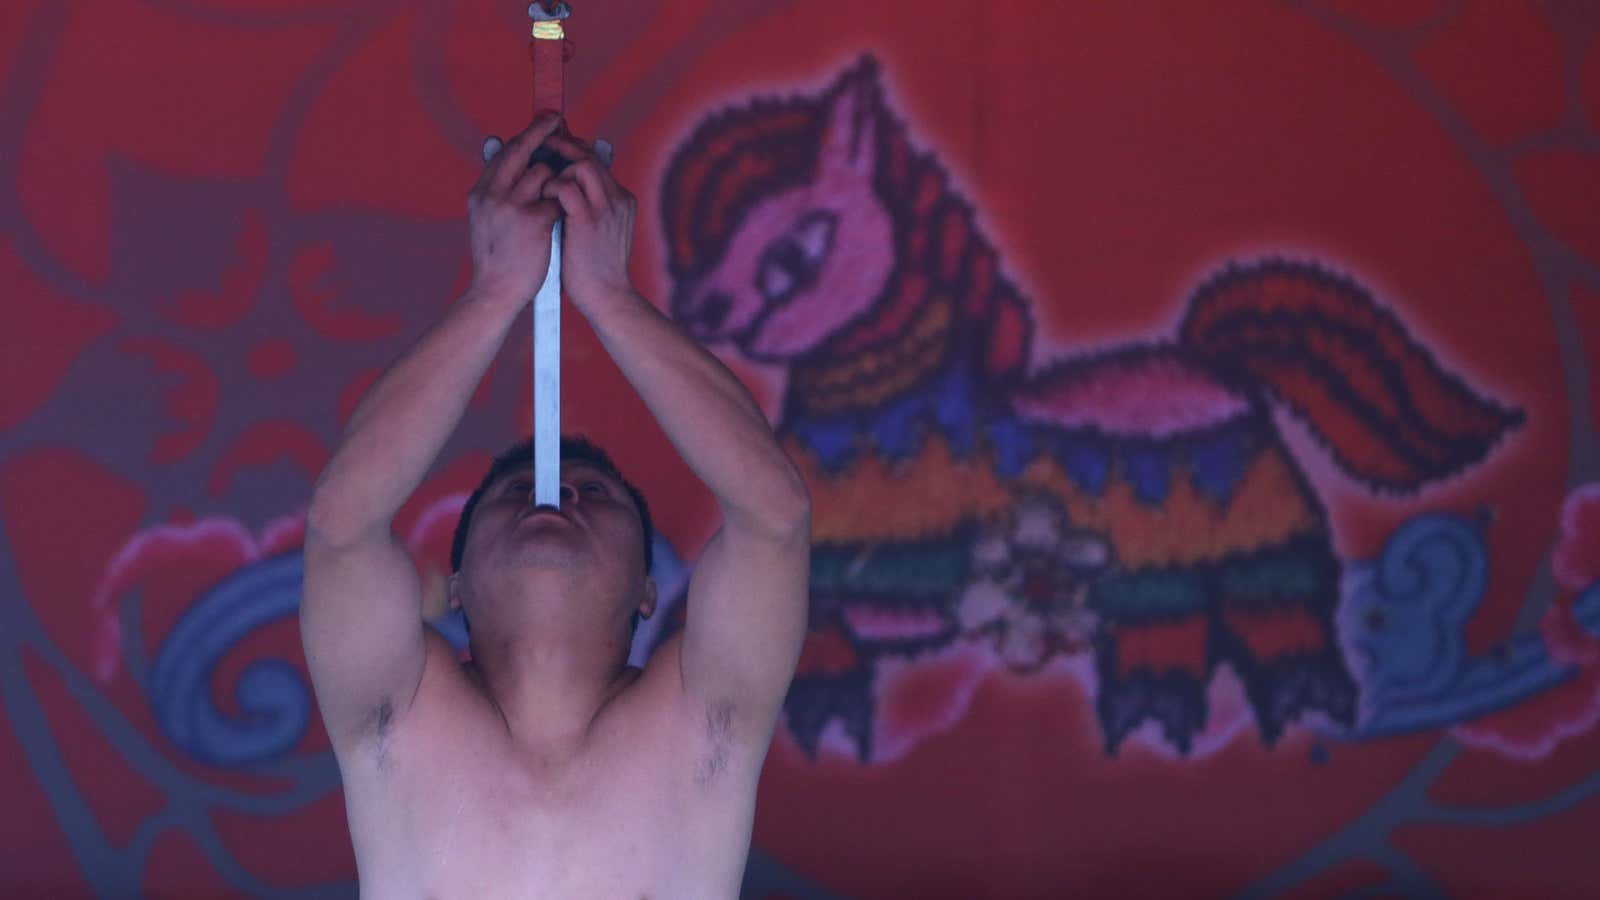 A qigong demonstration at a temple fair in Beijing.